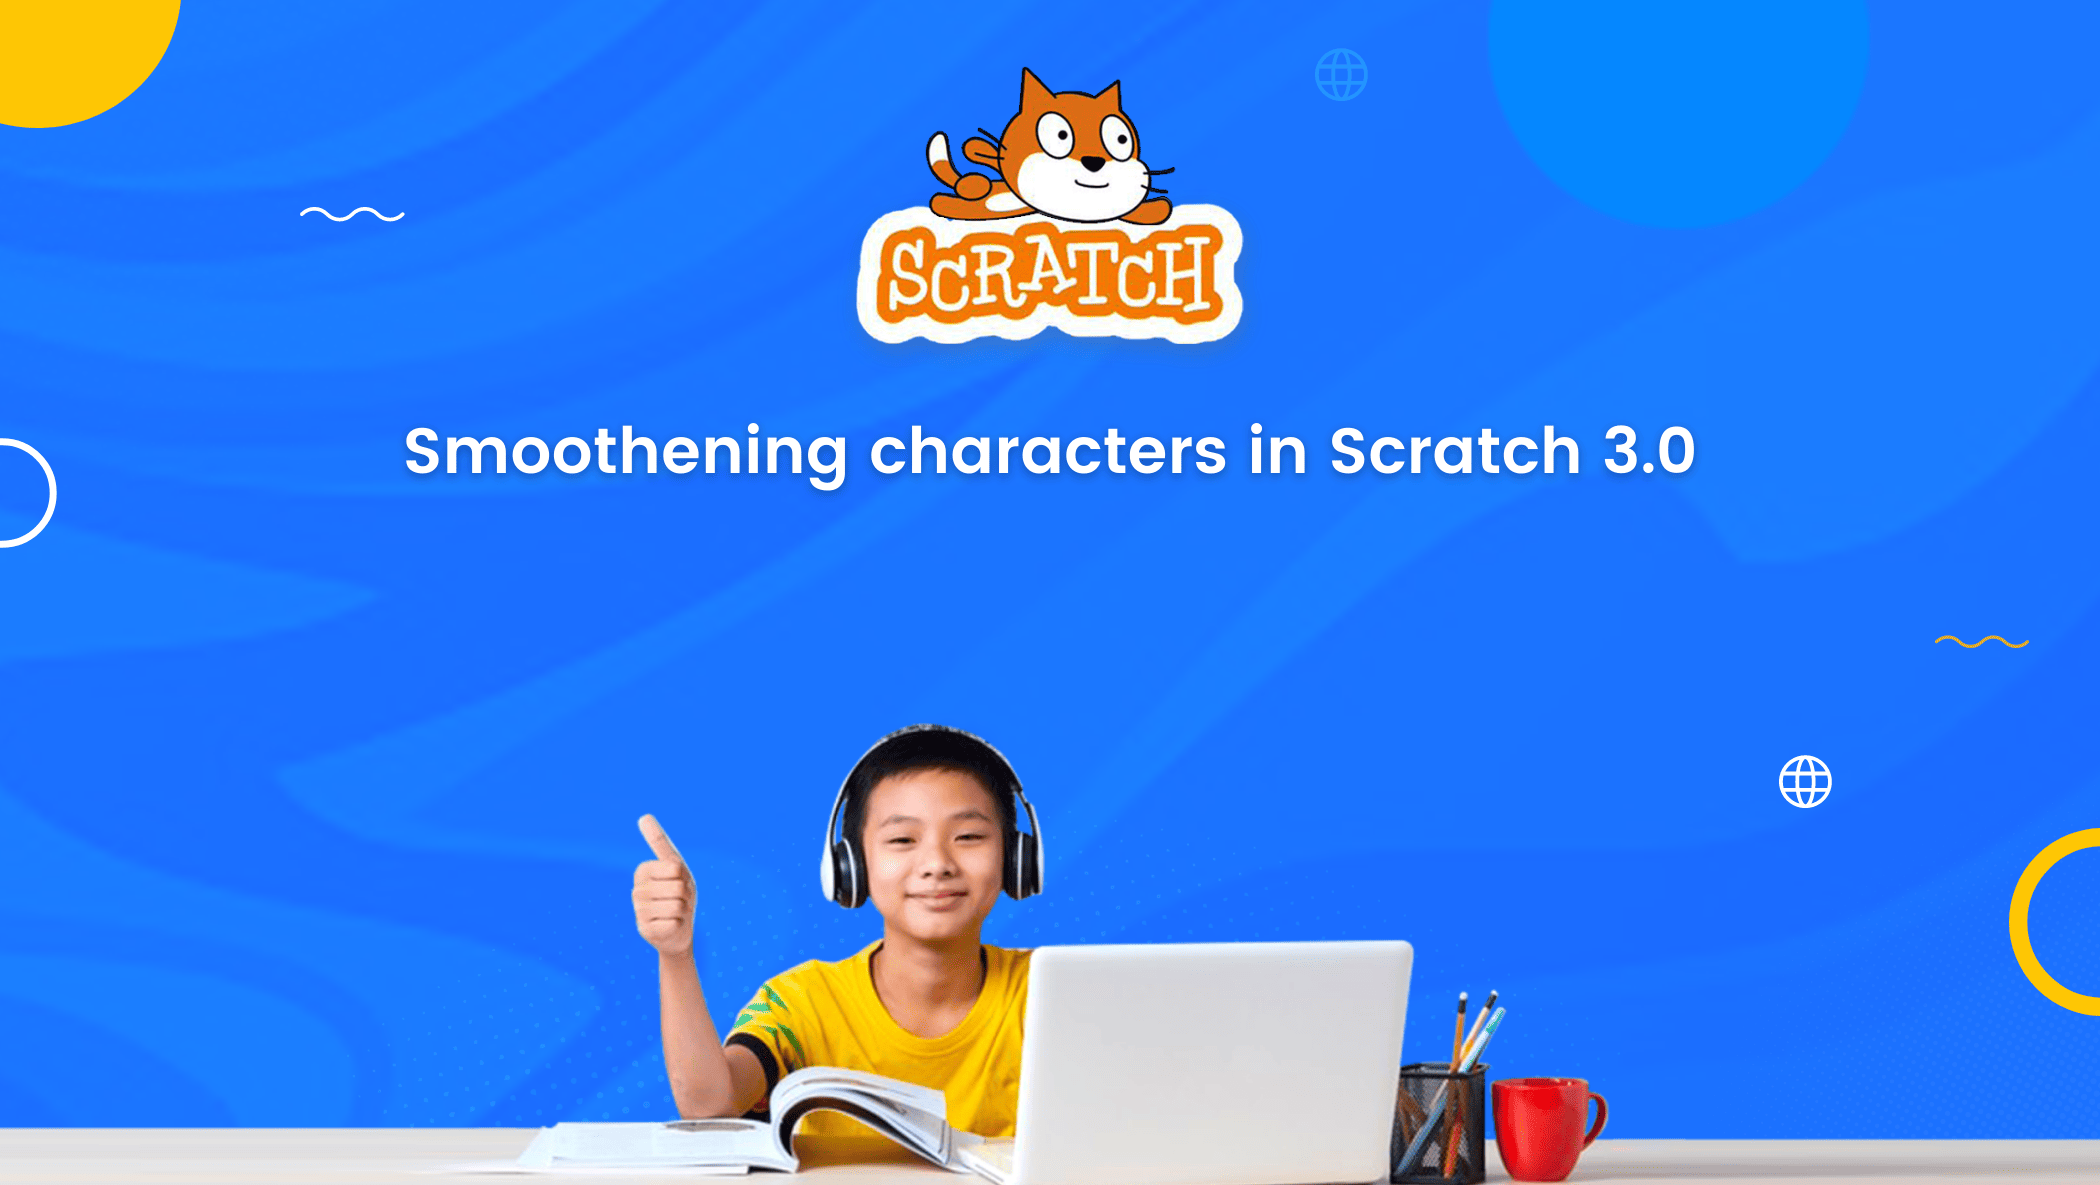 Smoothening characters in Scratch 3.0